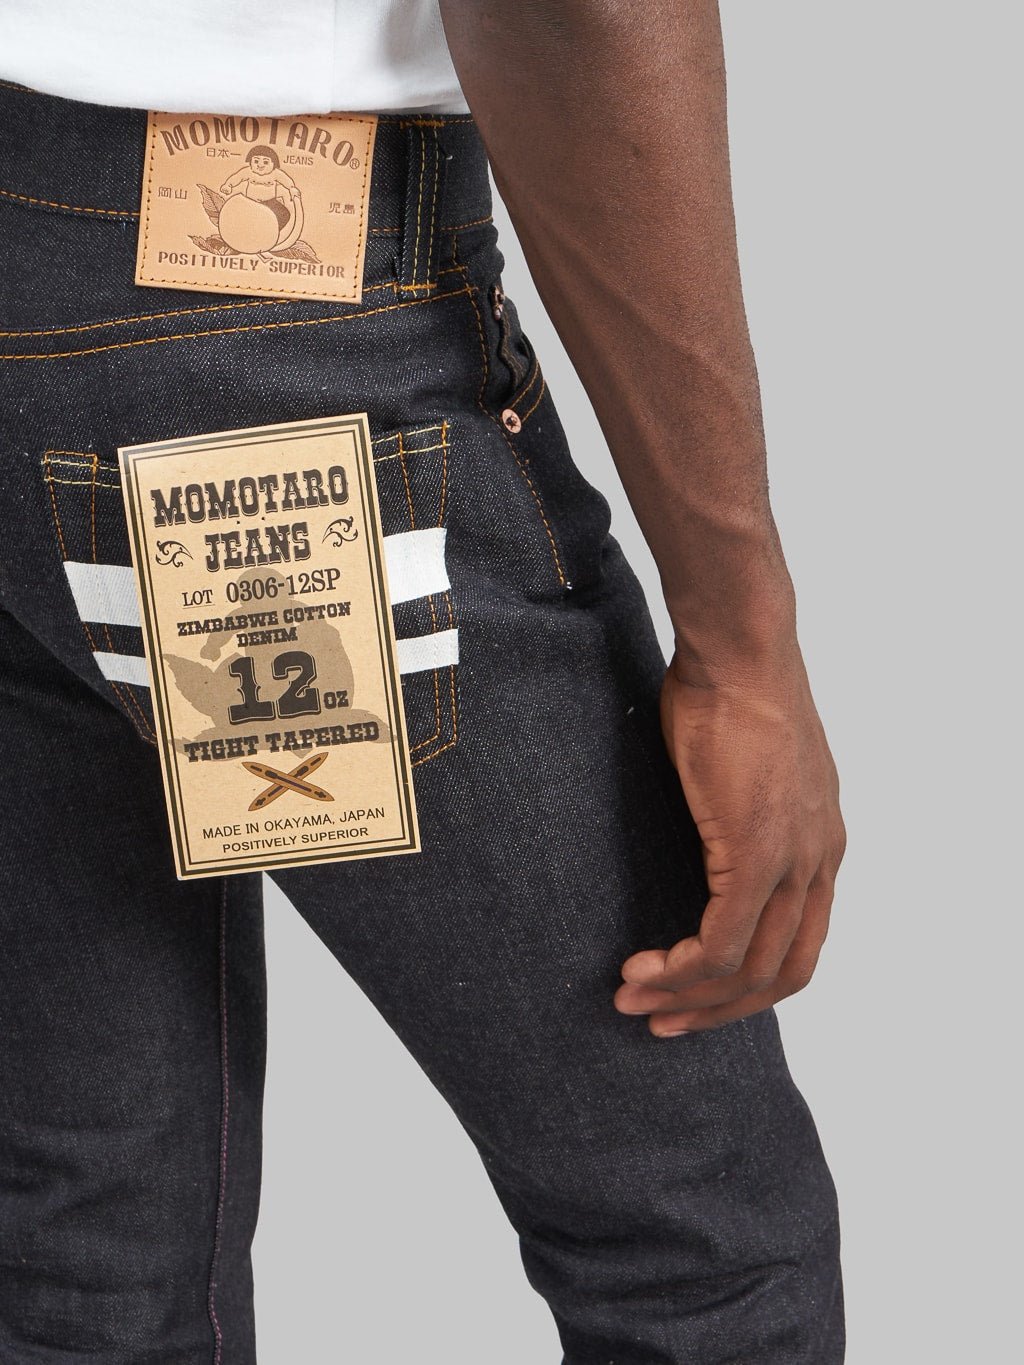 Momotaro 0306 12SP Going To Battle 12oz Tight Tapered Jeans  back pocket